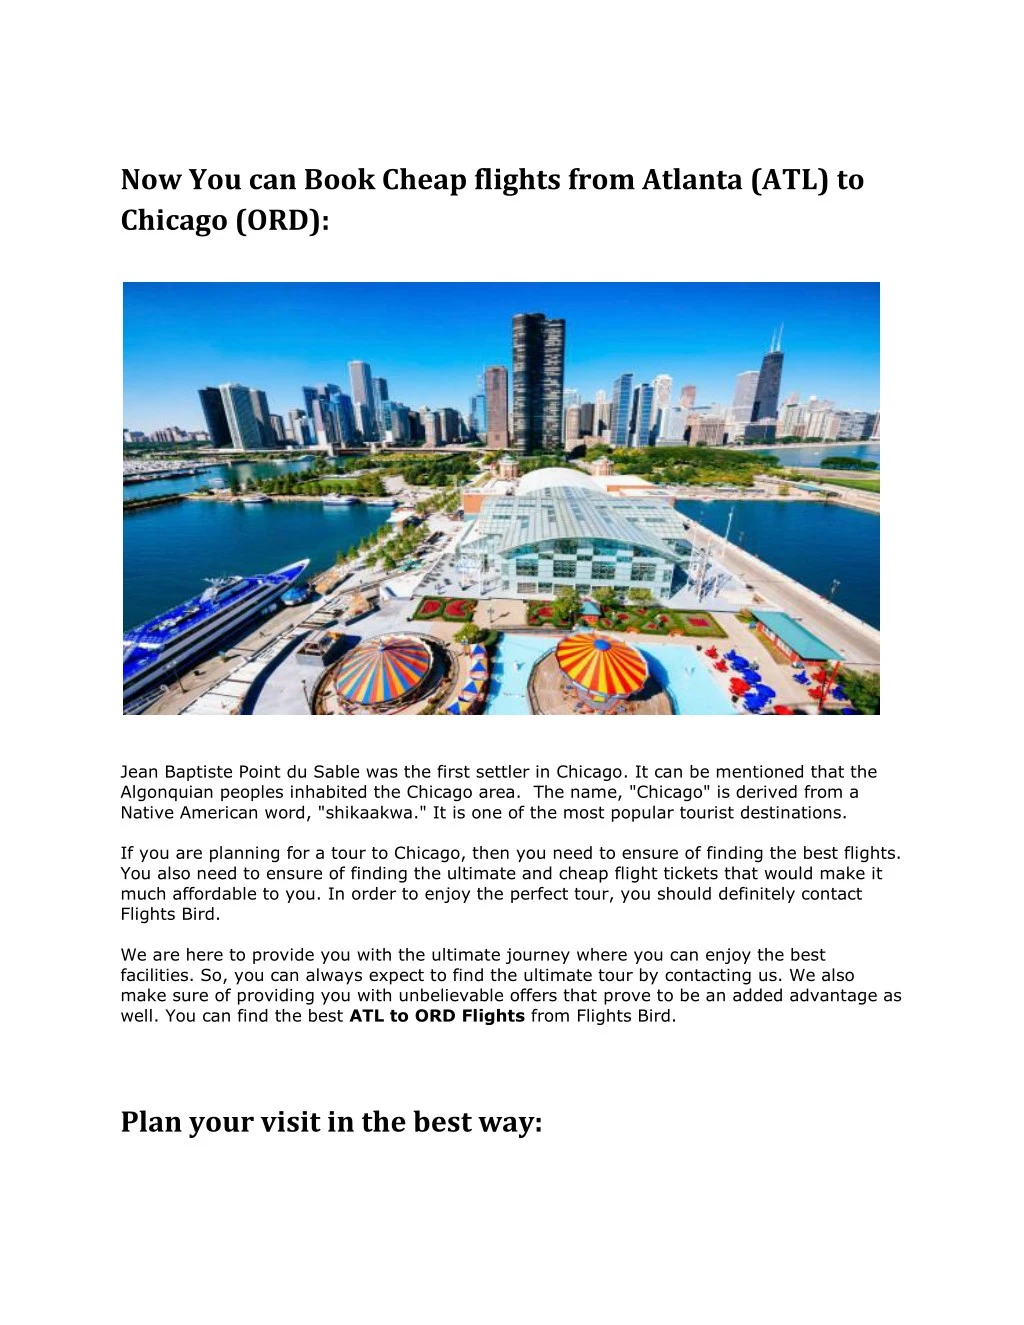 now you can book cheap flights from atlanta